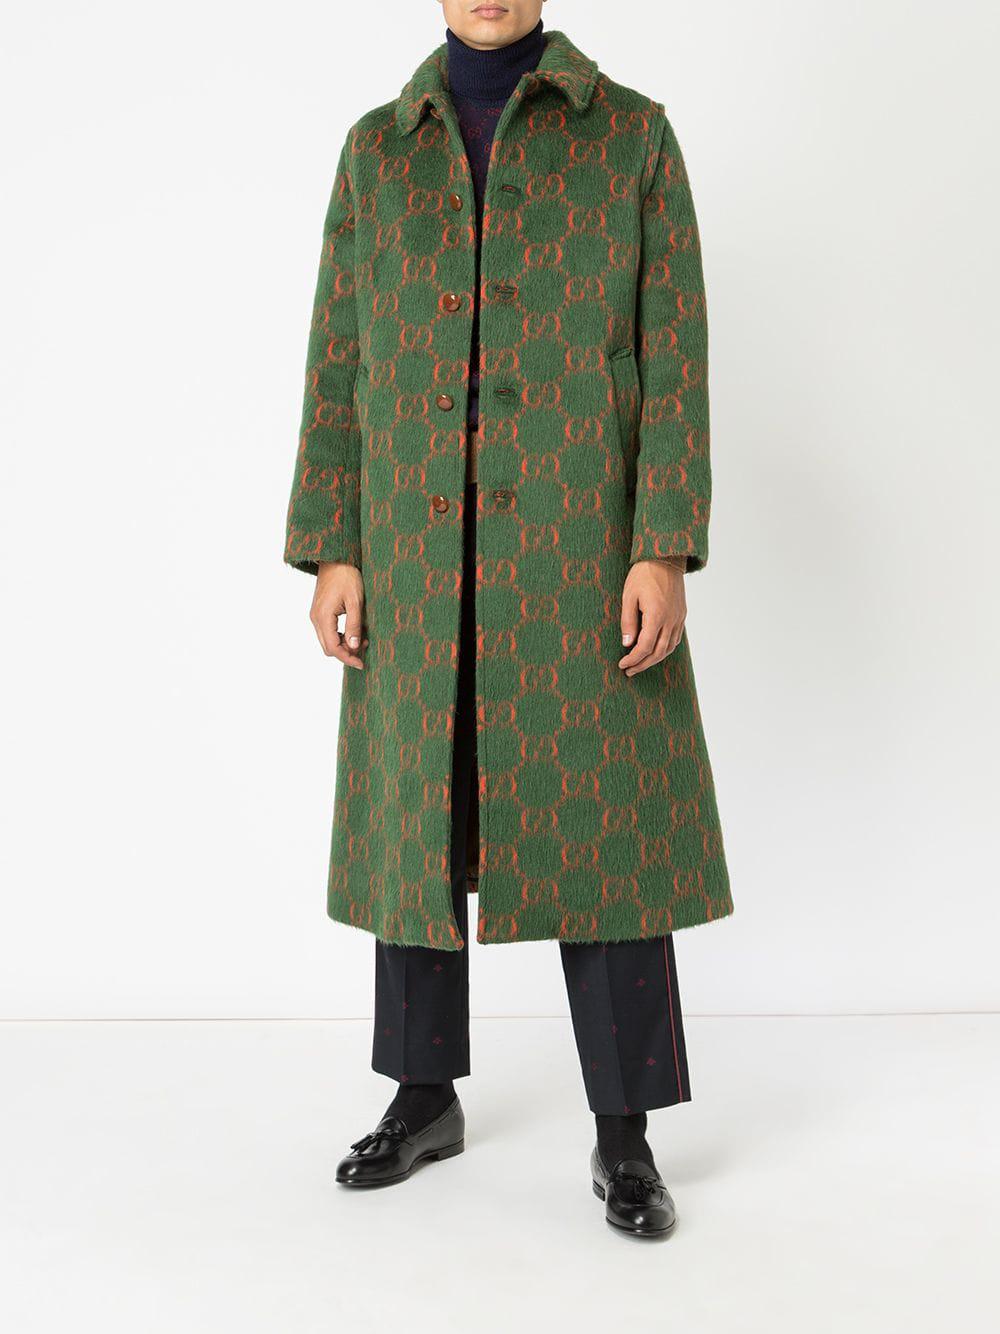 gucci trench coat